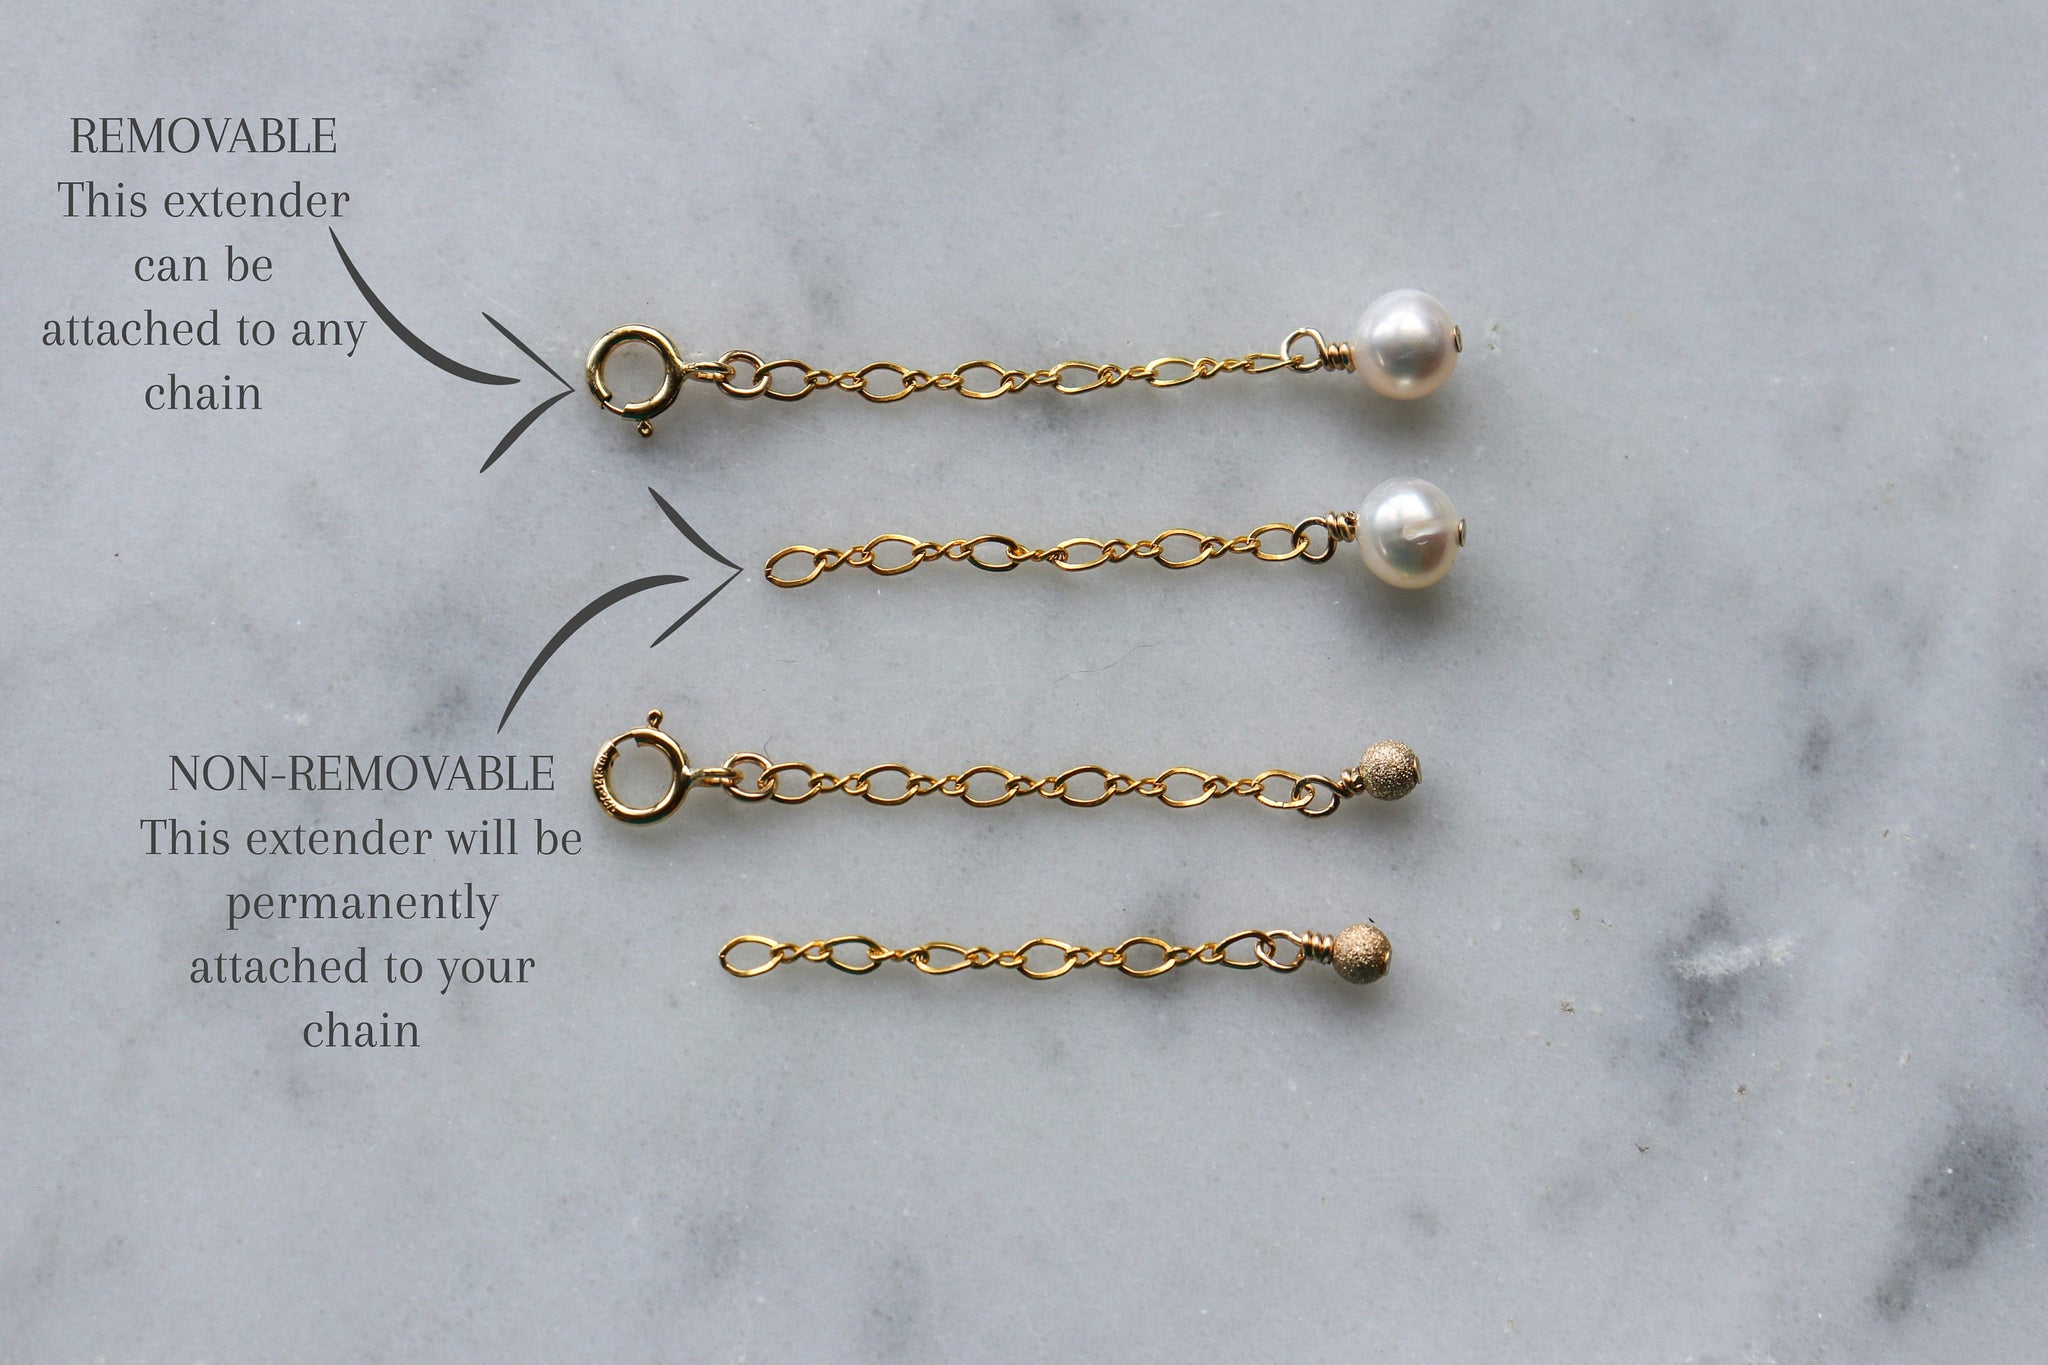  14k Solid Gold Chain Extender, Adjustable Chain Extender, Removable Dainty Chain, 1, 2, 3 4 or 5 Chain